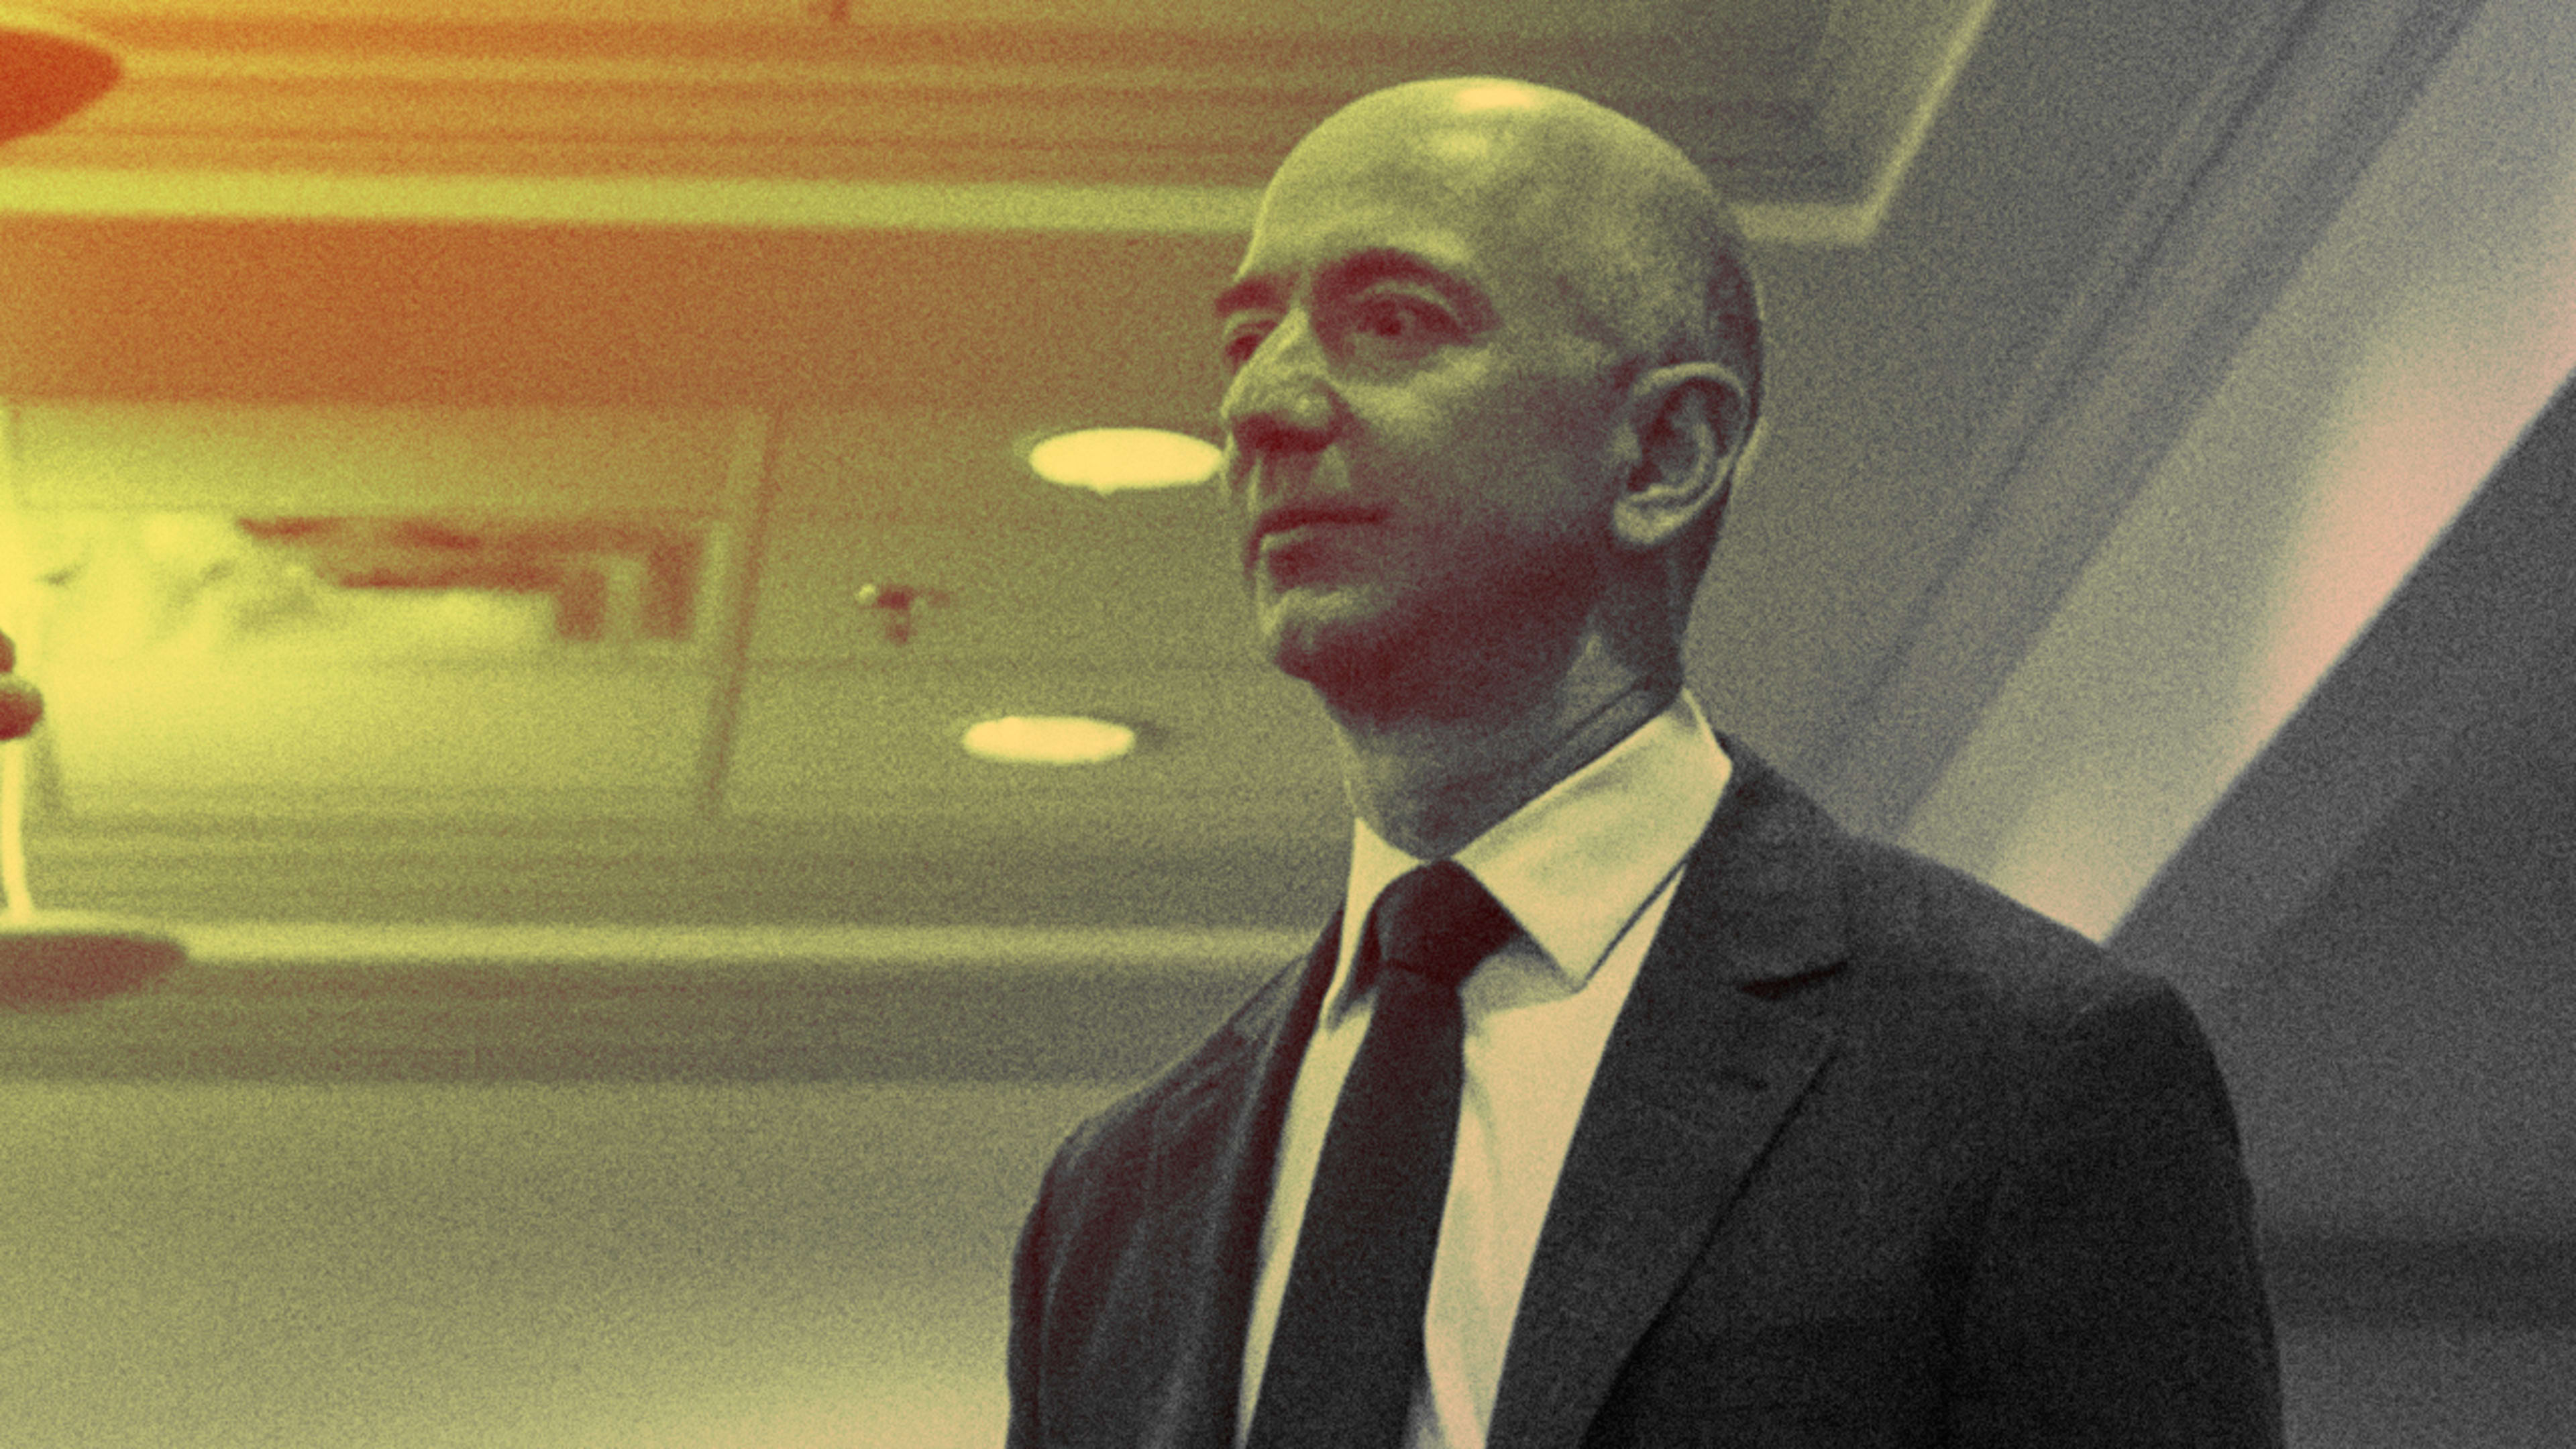 In shocker post, Jeff Bezos releases email extortion attempt